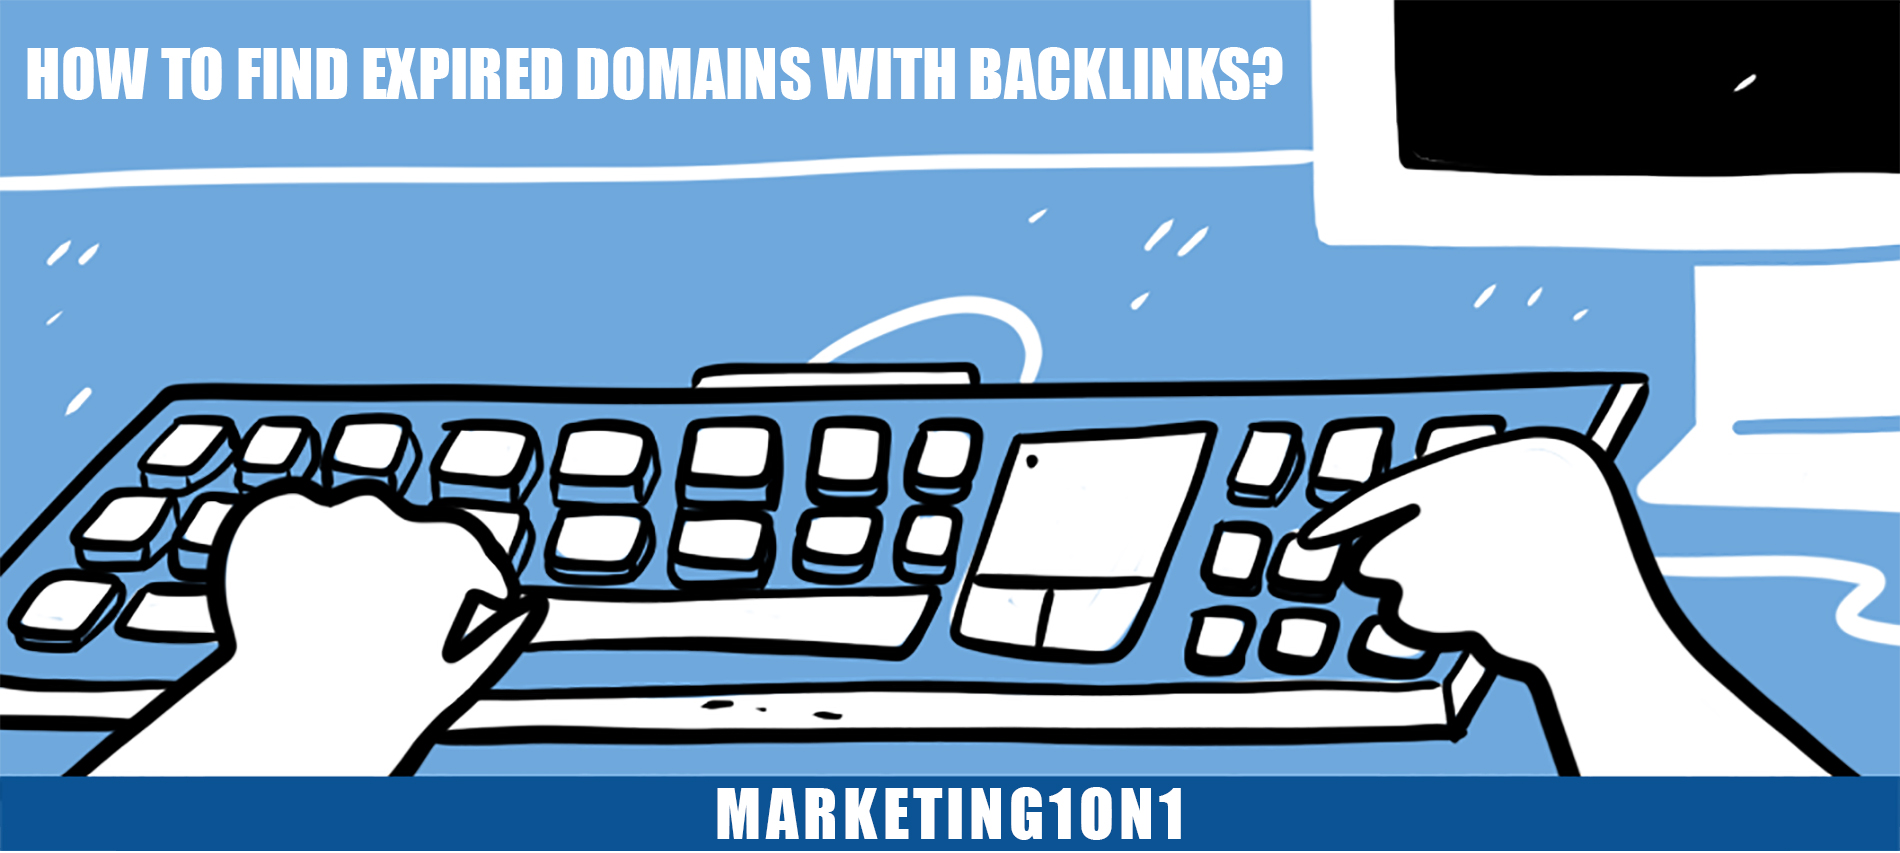 How to find expired domains with backlinks?